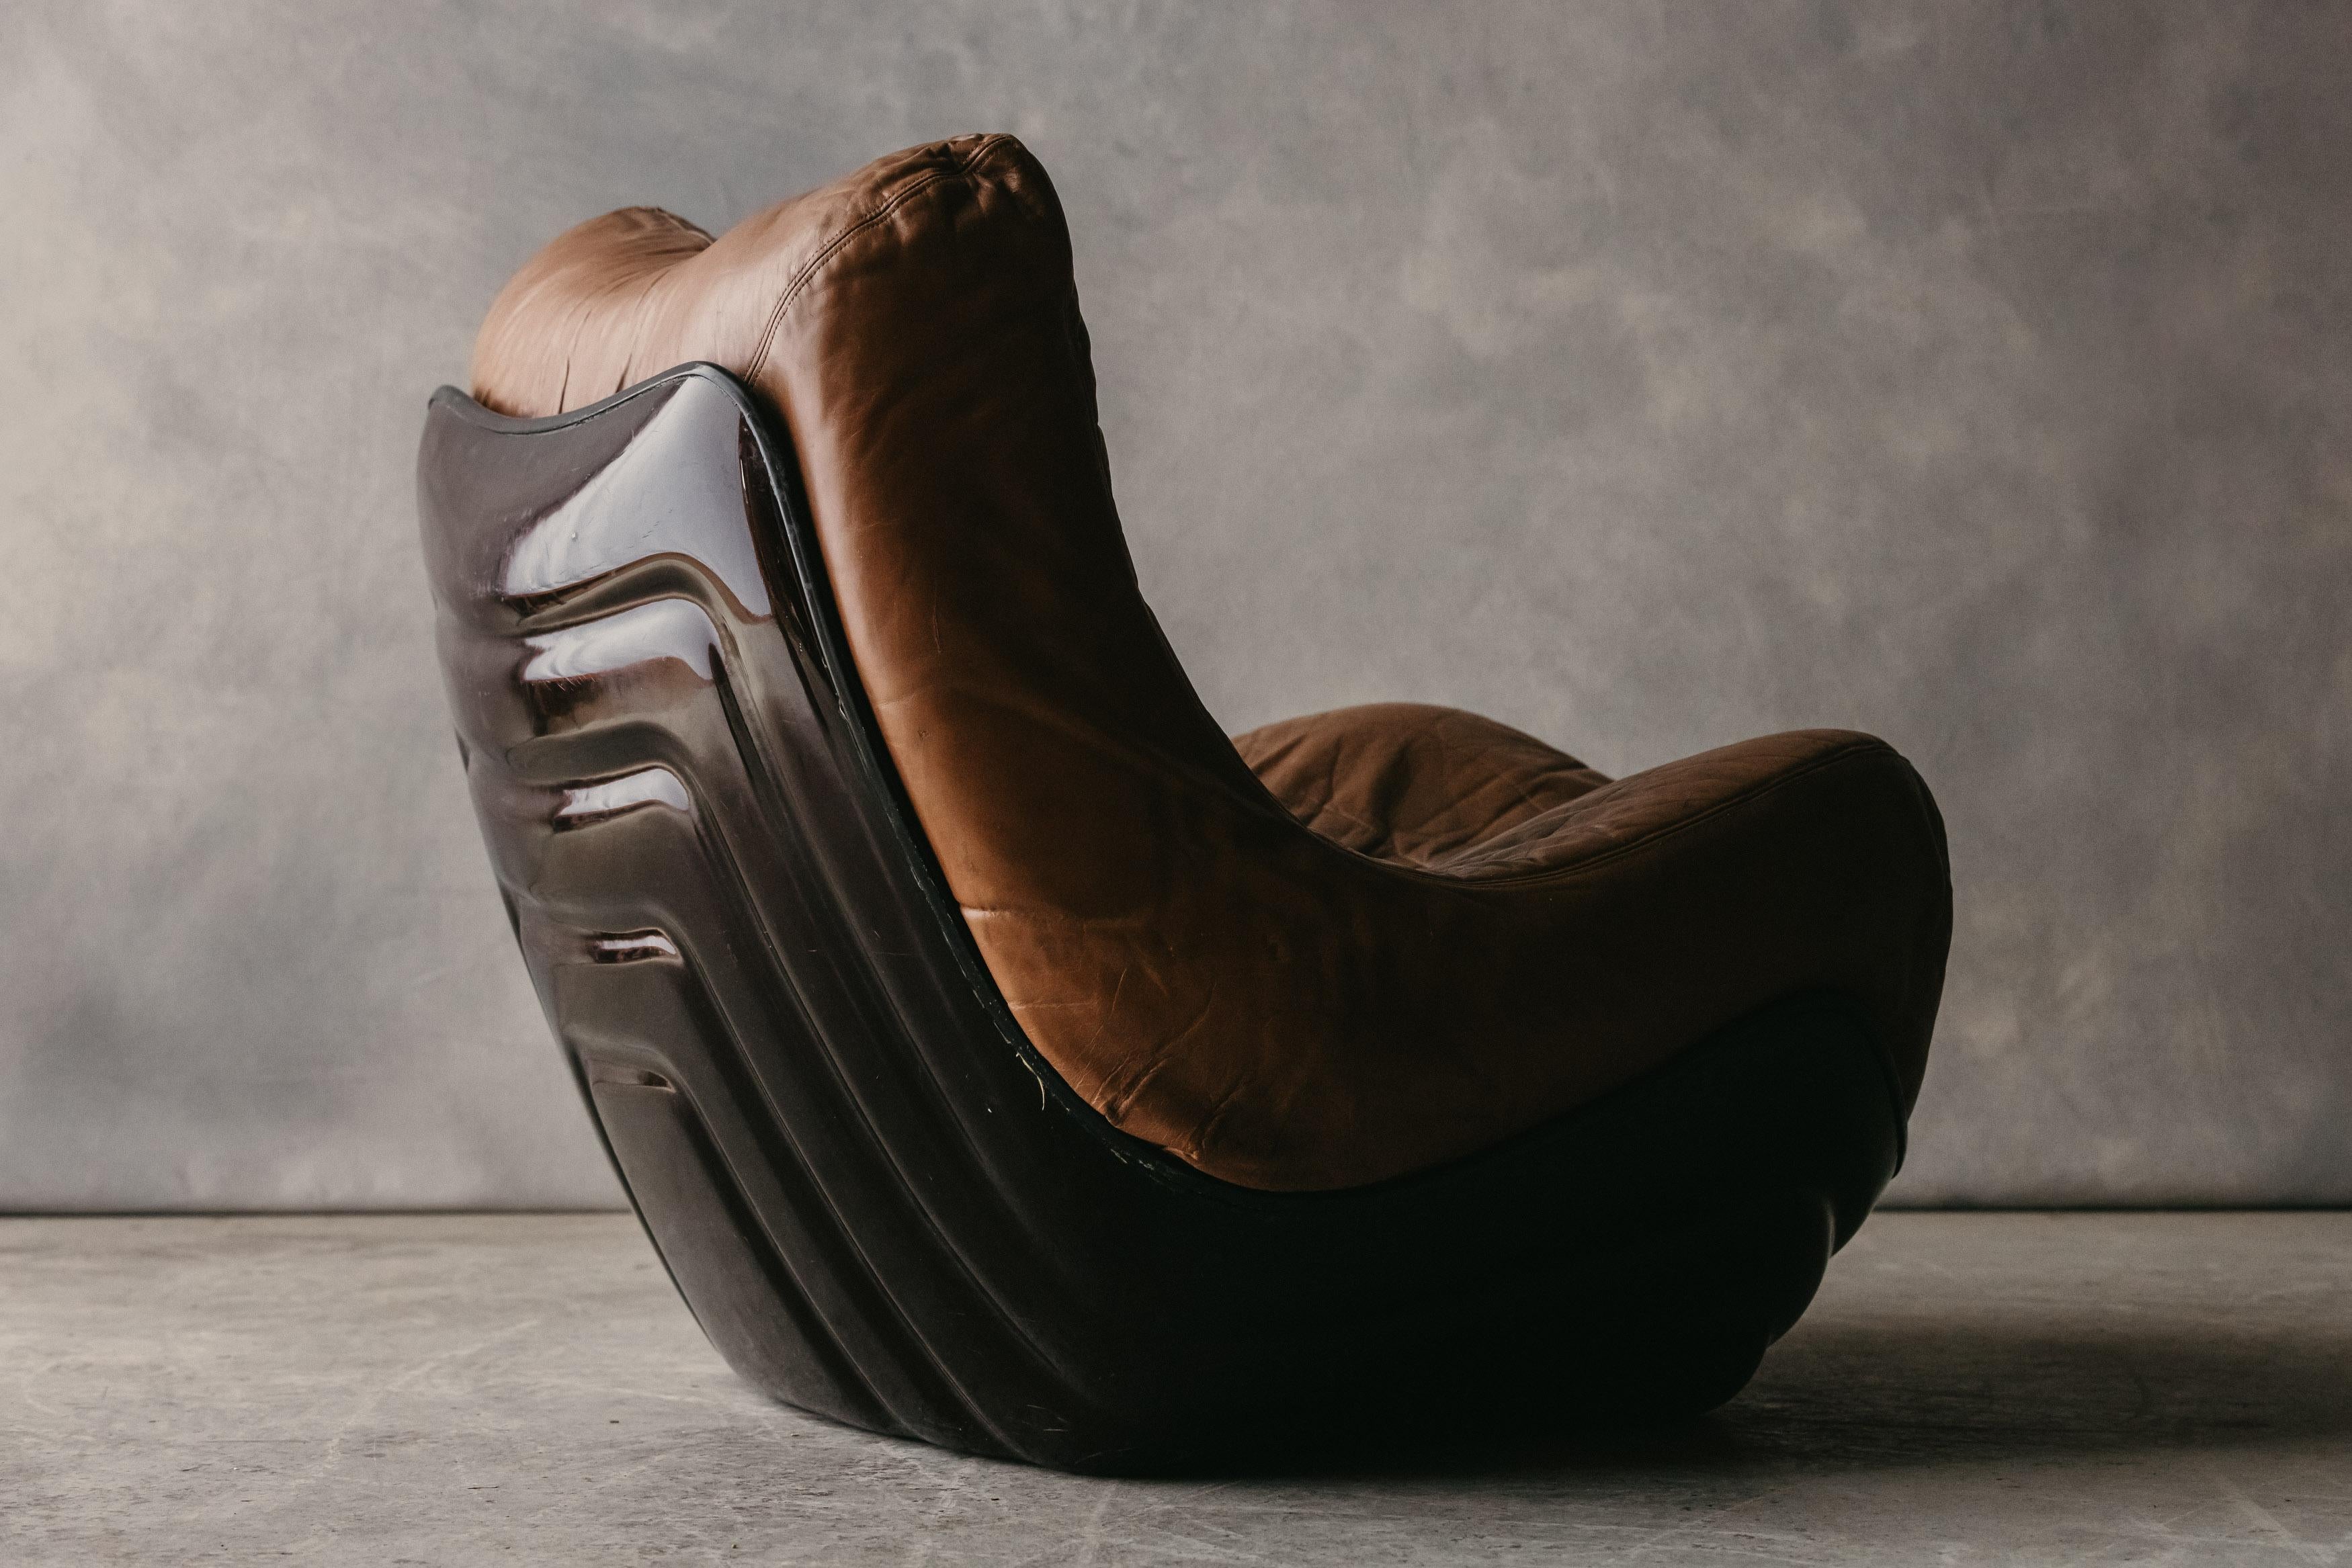 Vintage Lounge Chair By Bernard Gavin For Line Roset, Circa 1970.  Rare model with original brown leather and plastic shell frame.  Nice wear and use.

